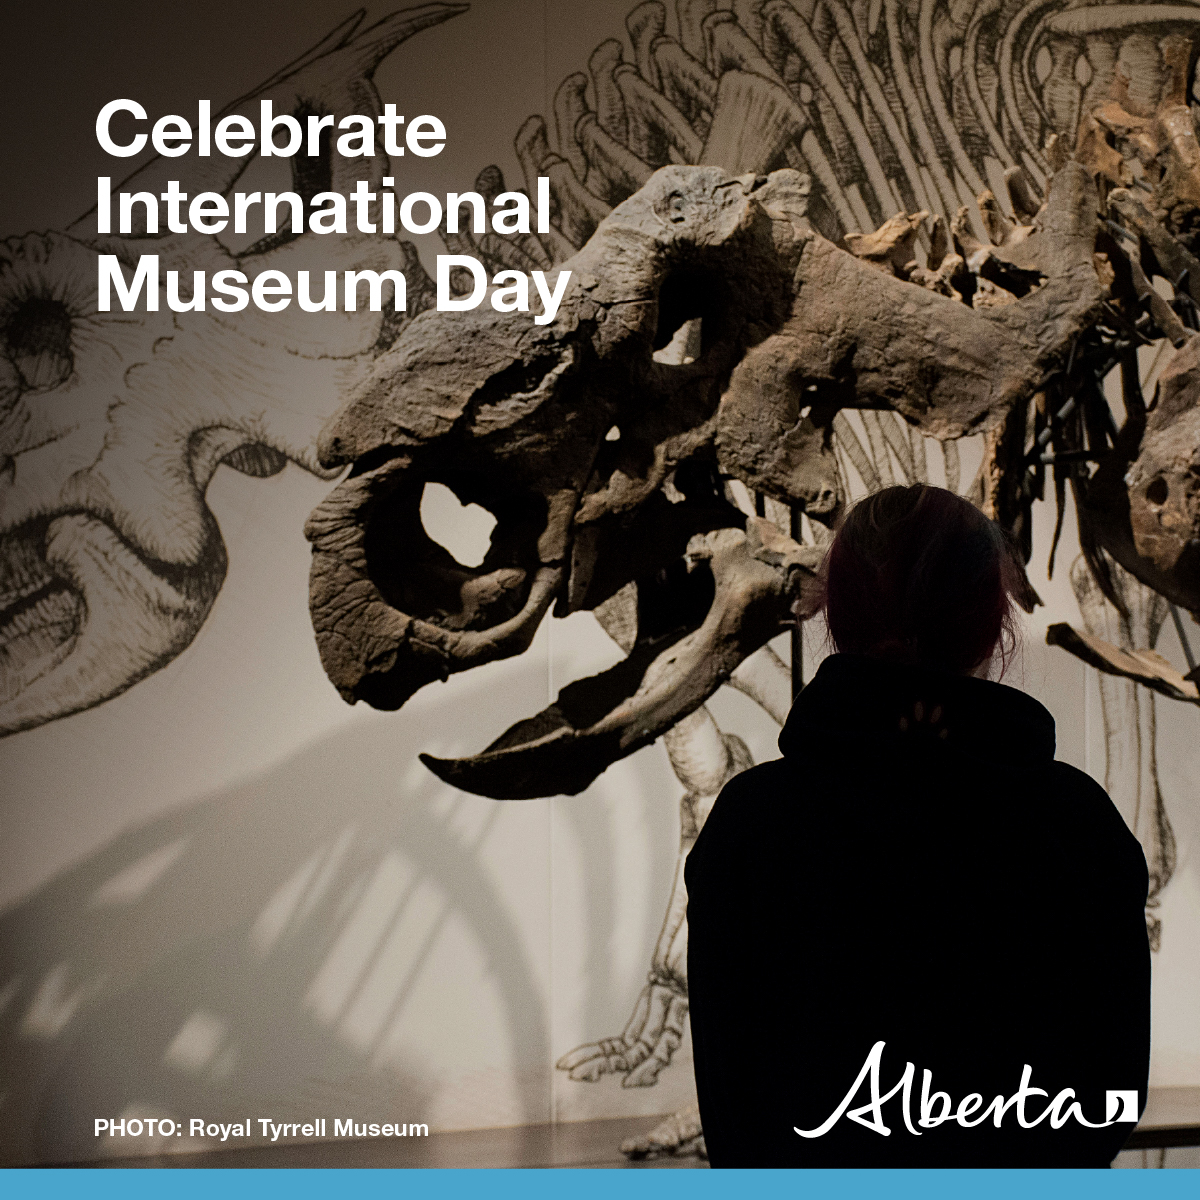 Happy #InternationalMuseumDay! Celebrate the day at Alberta’s amazing museums, historic sites, museums and archives across the province. There are many new and diverse experiences starting this summer. Check out the list here: alberta.ca/historic-sites…